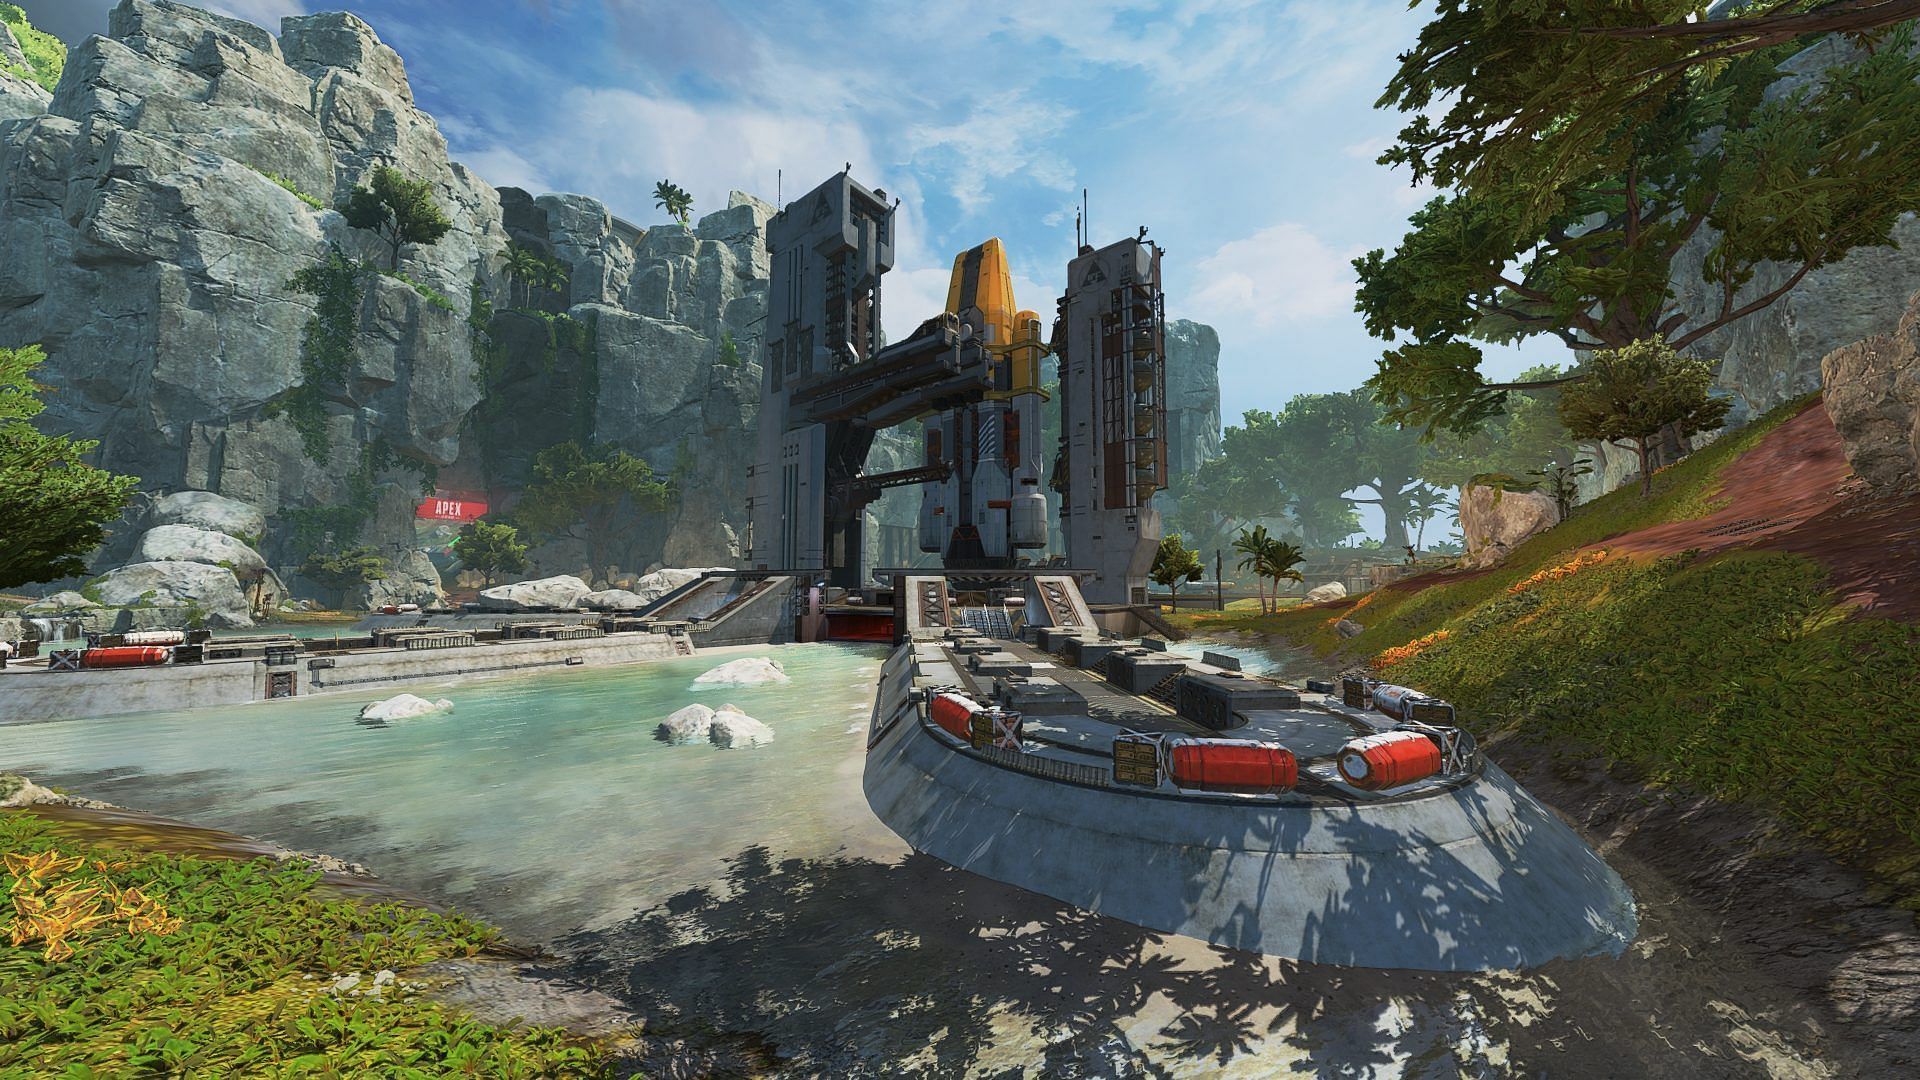 Launch Pad in Apex Legends (Image via Electronic Arts)